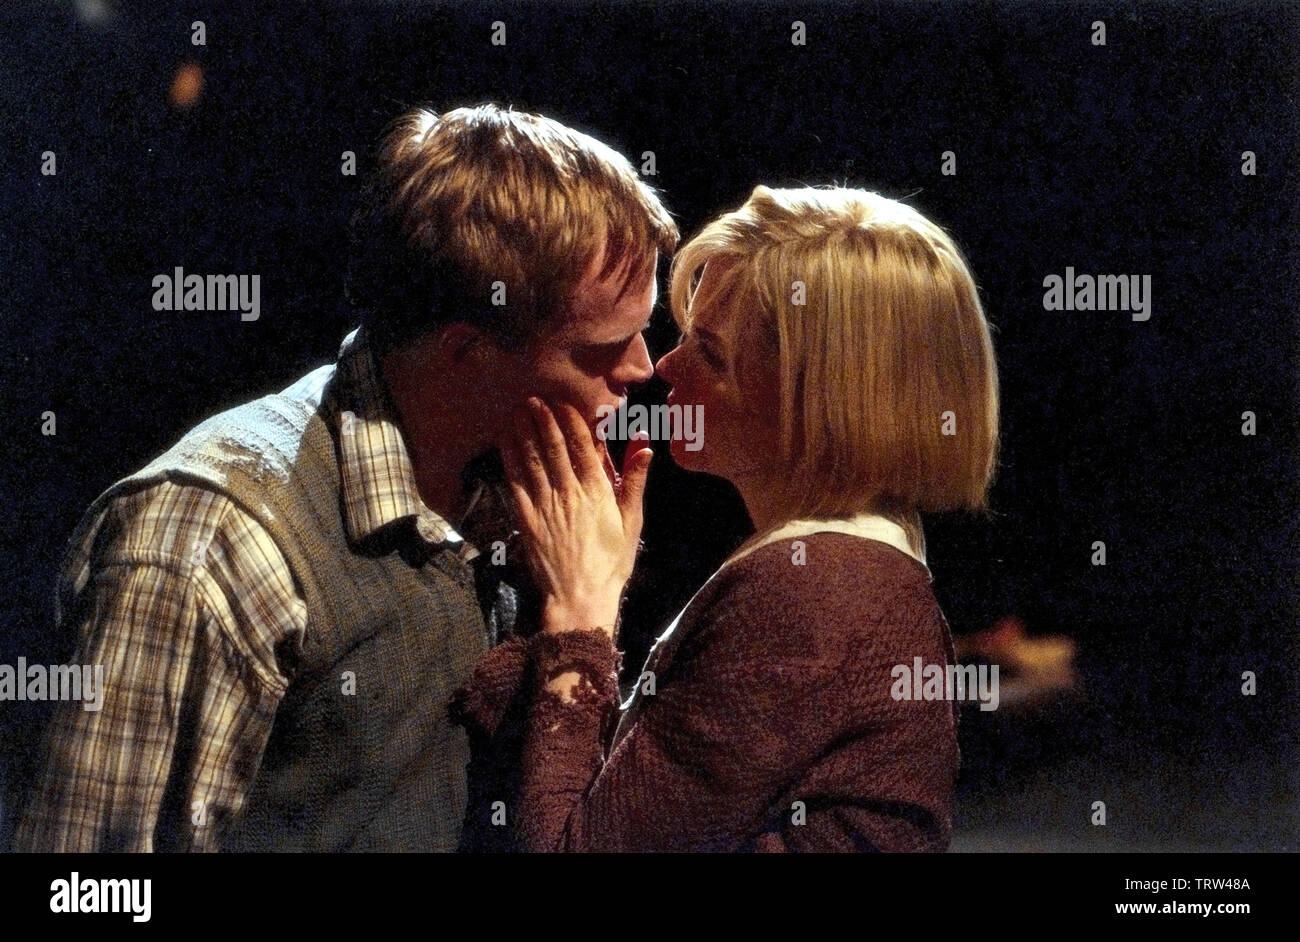 Nearly Kissing High Resolution Stock Photography and Images - Alamy